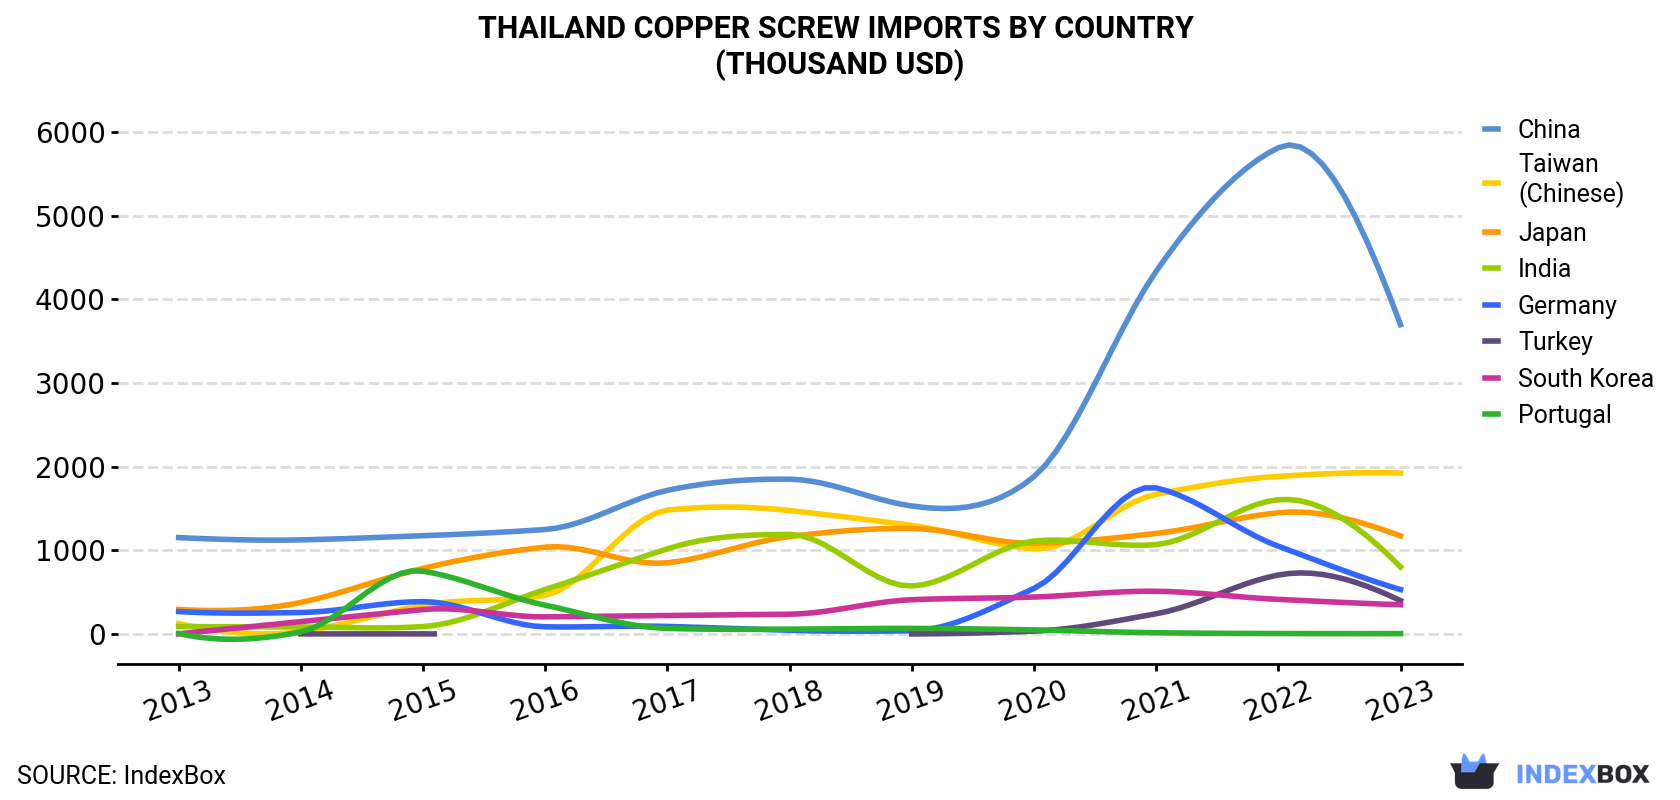 Thailand Copper Screw Imports By Country (Thousand USD)